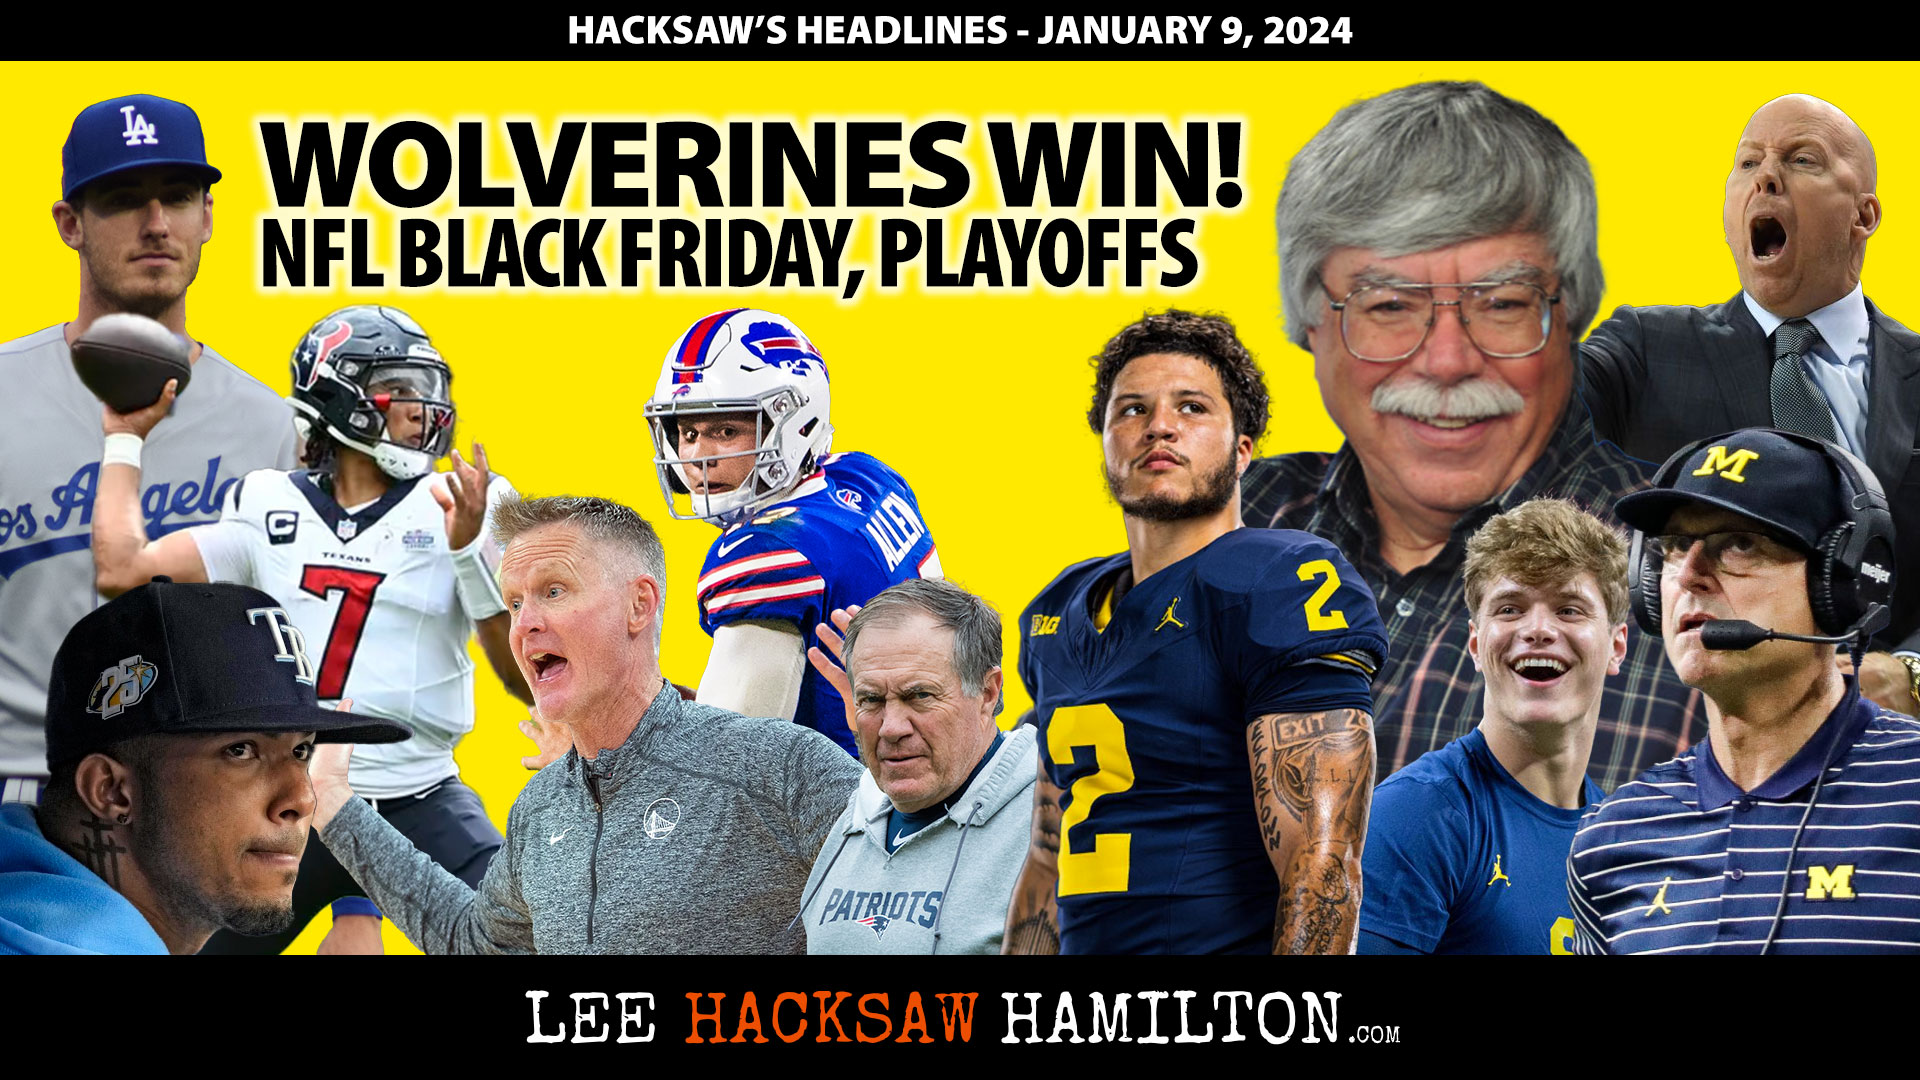 Lee Hacksaw Hamilton discusses MIchigan Wolverines National Champs, NFL Black Monday, MLB Free Agency, Warriors, Rays, NHL, UCLA